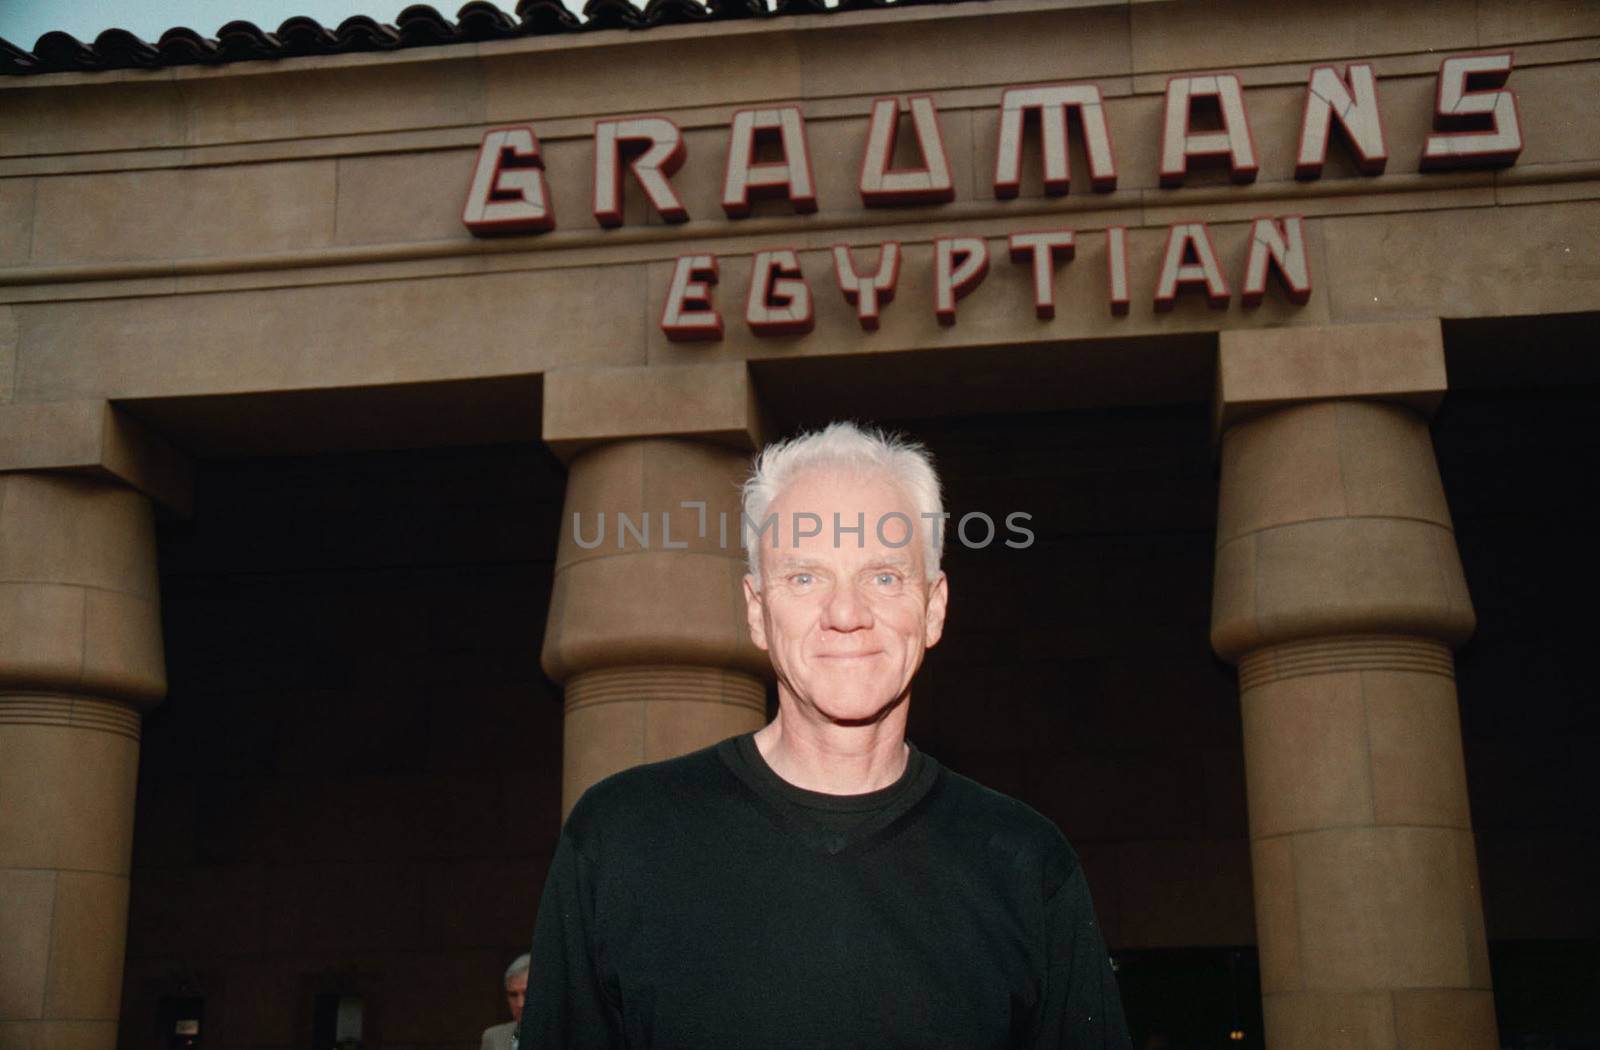 Malcolm McDowell at the American Cinematheque's screening of "A Clockwork Orange" at the Egyptian Theater, Hollywood, 06-21-01